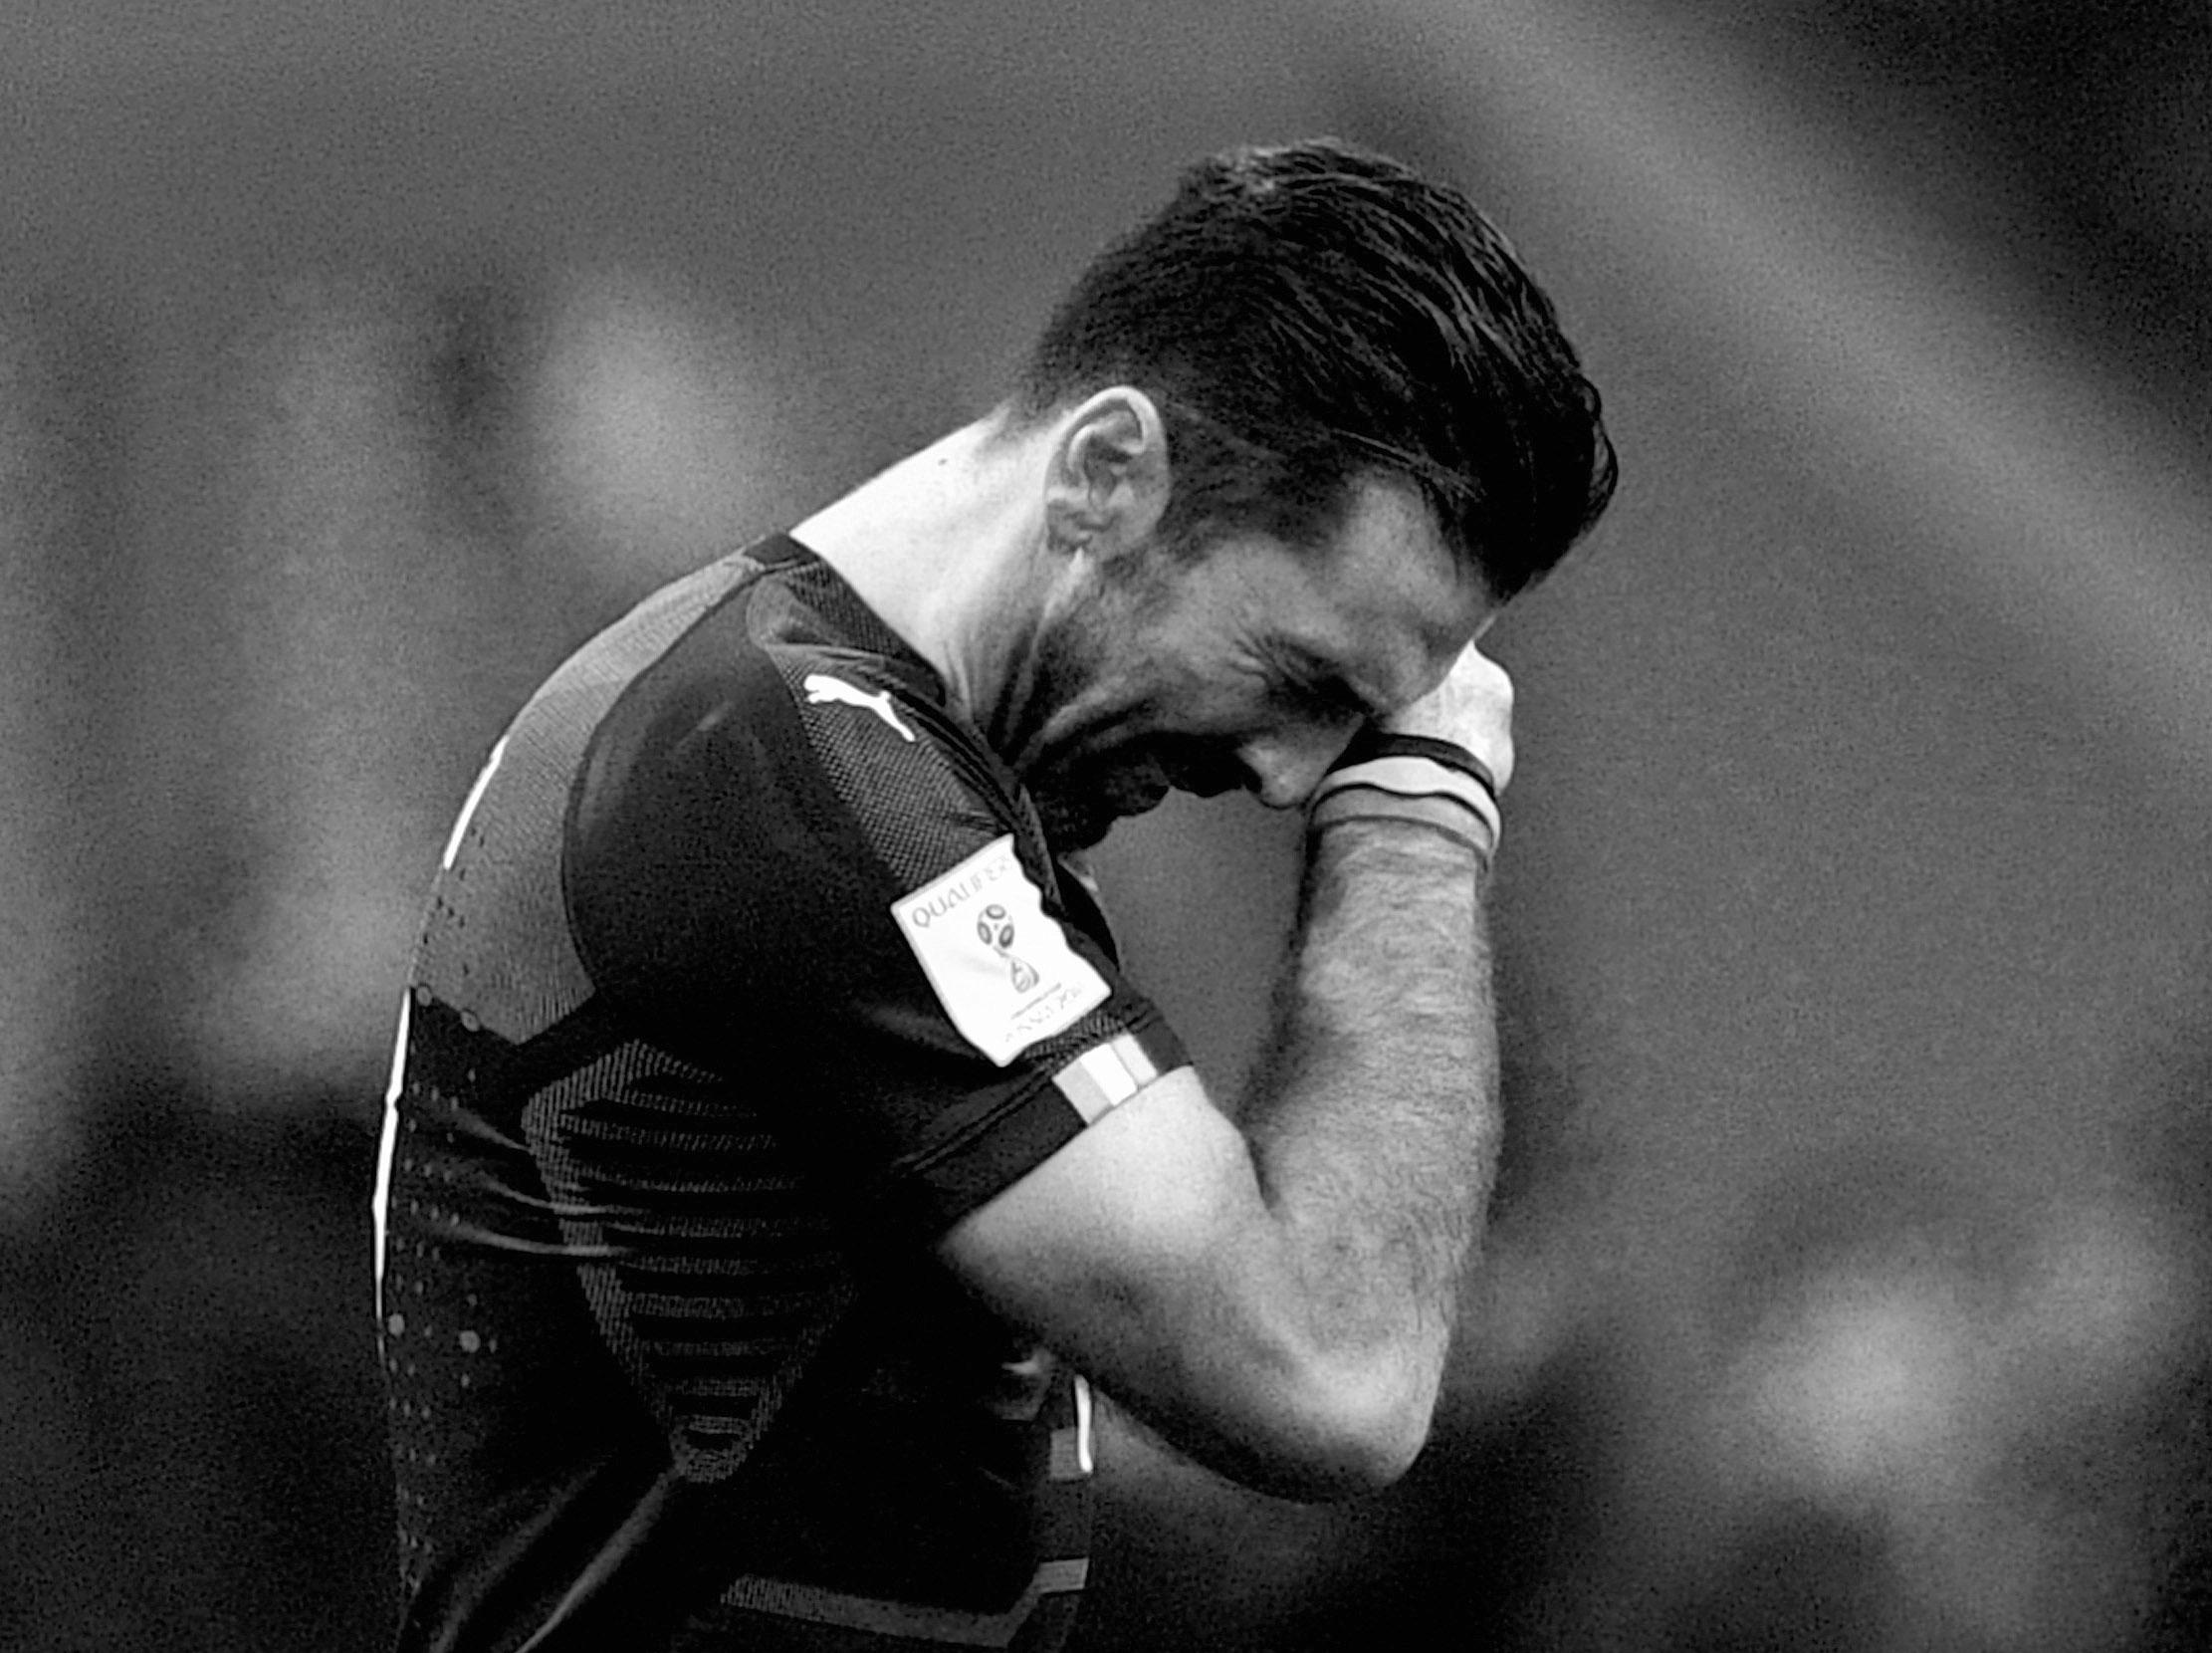 Gigi Buffon's Italy career ended in tears rather than triumph